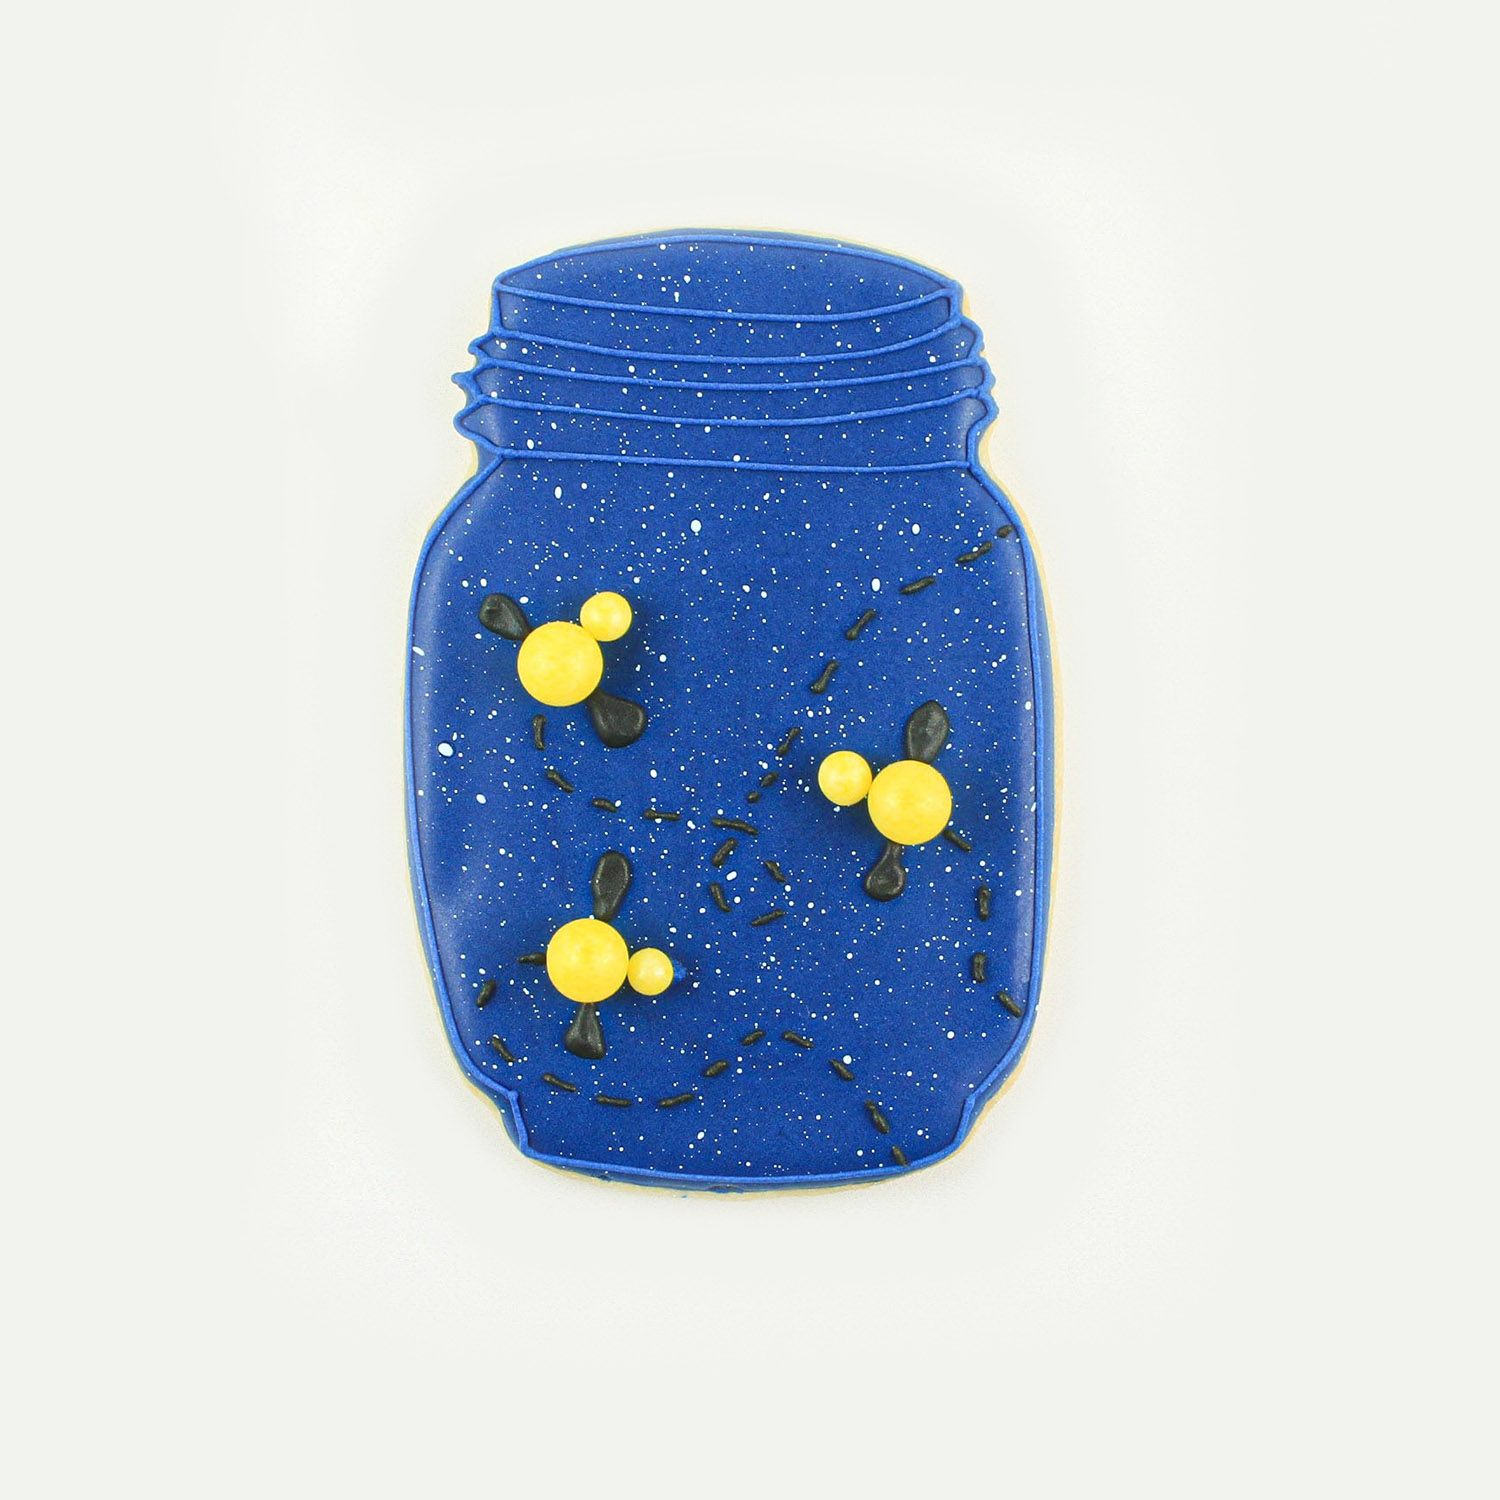 Mason Jar Cookie piped in navy blue royal icing, white splatter, fireflies made of candy pearls and flight patterns